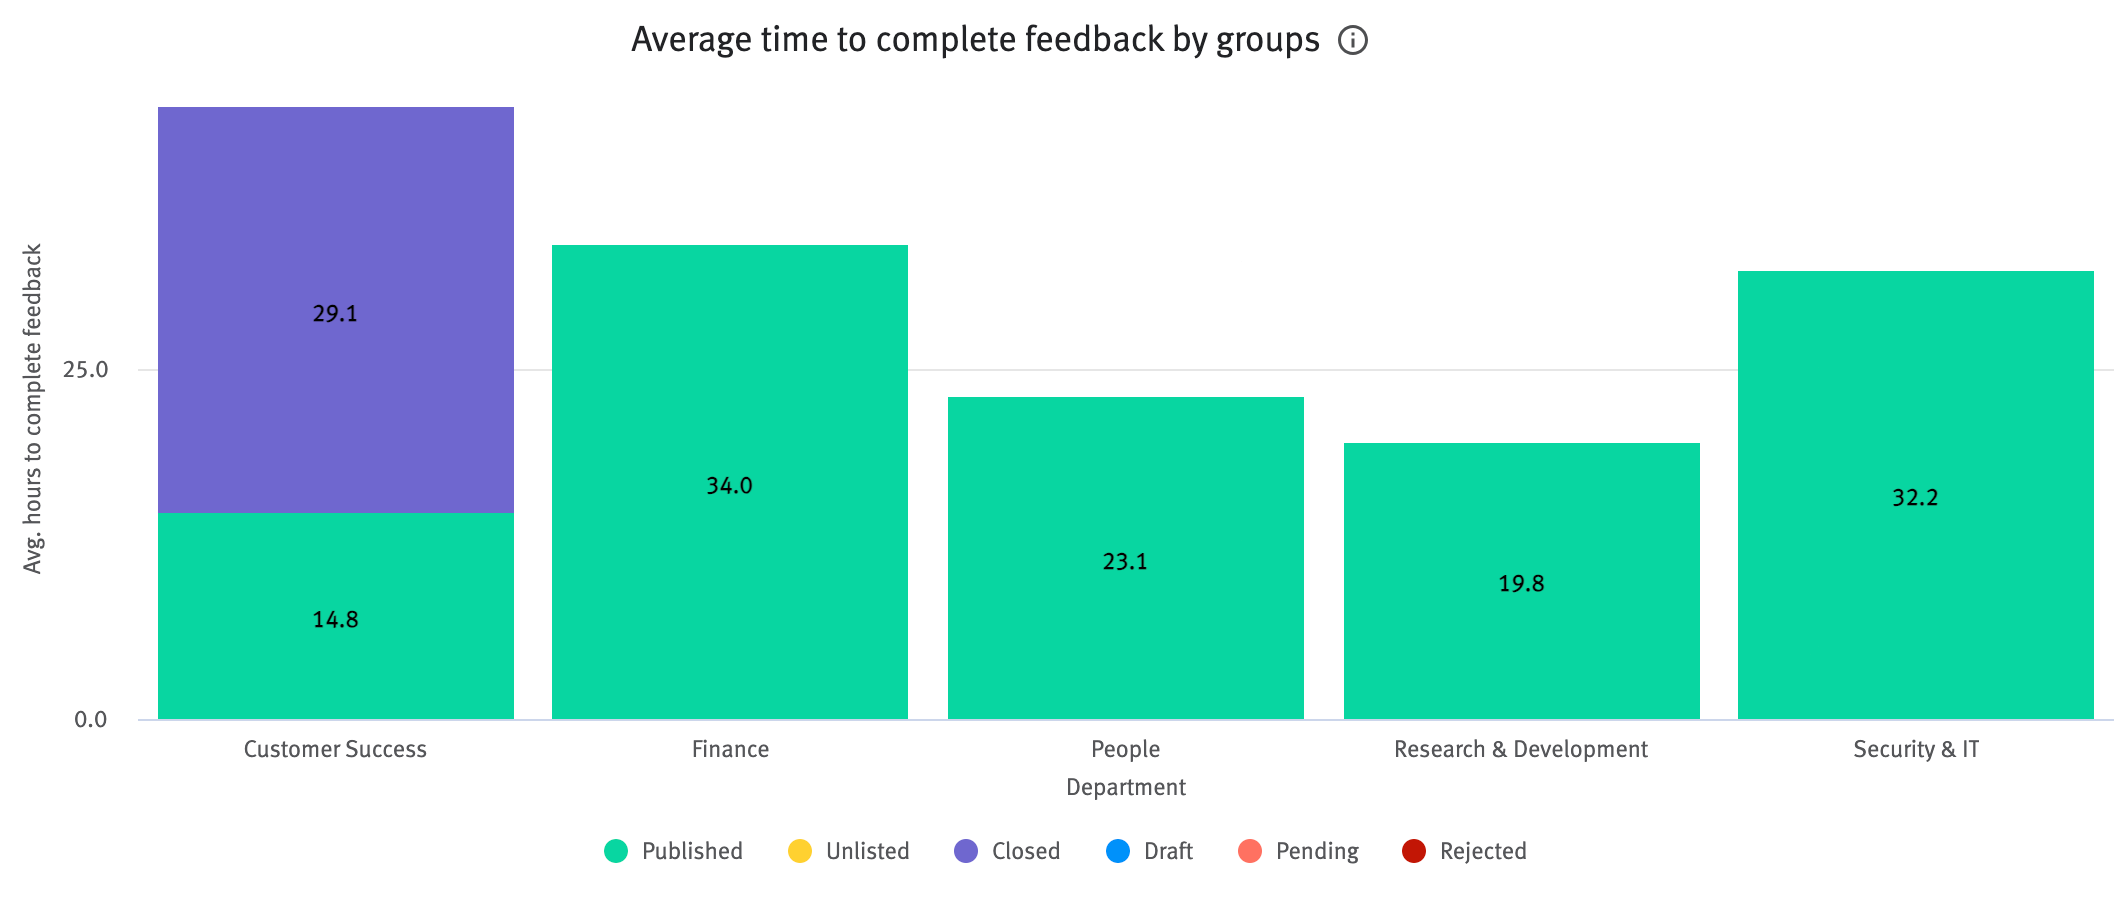 Average time to complete feedback by groups chart